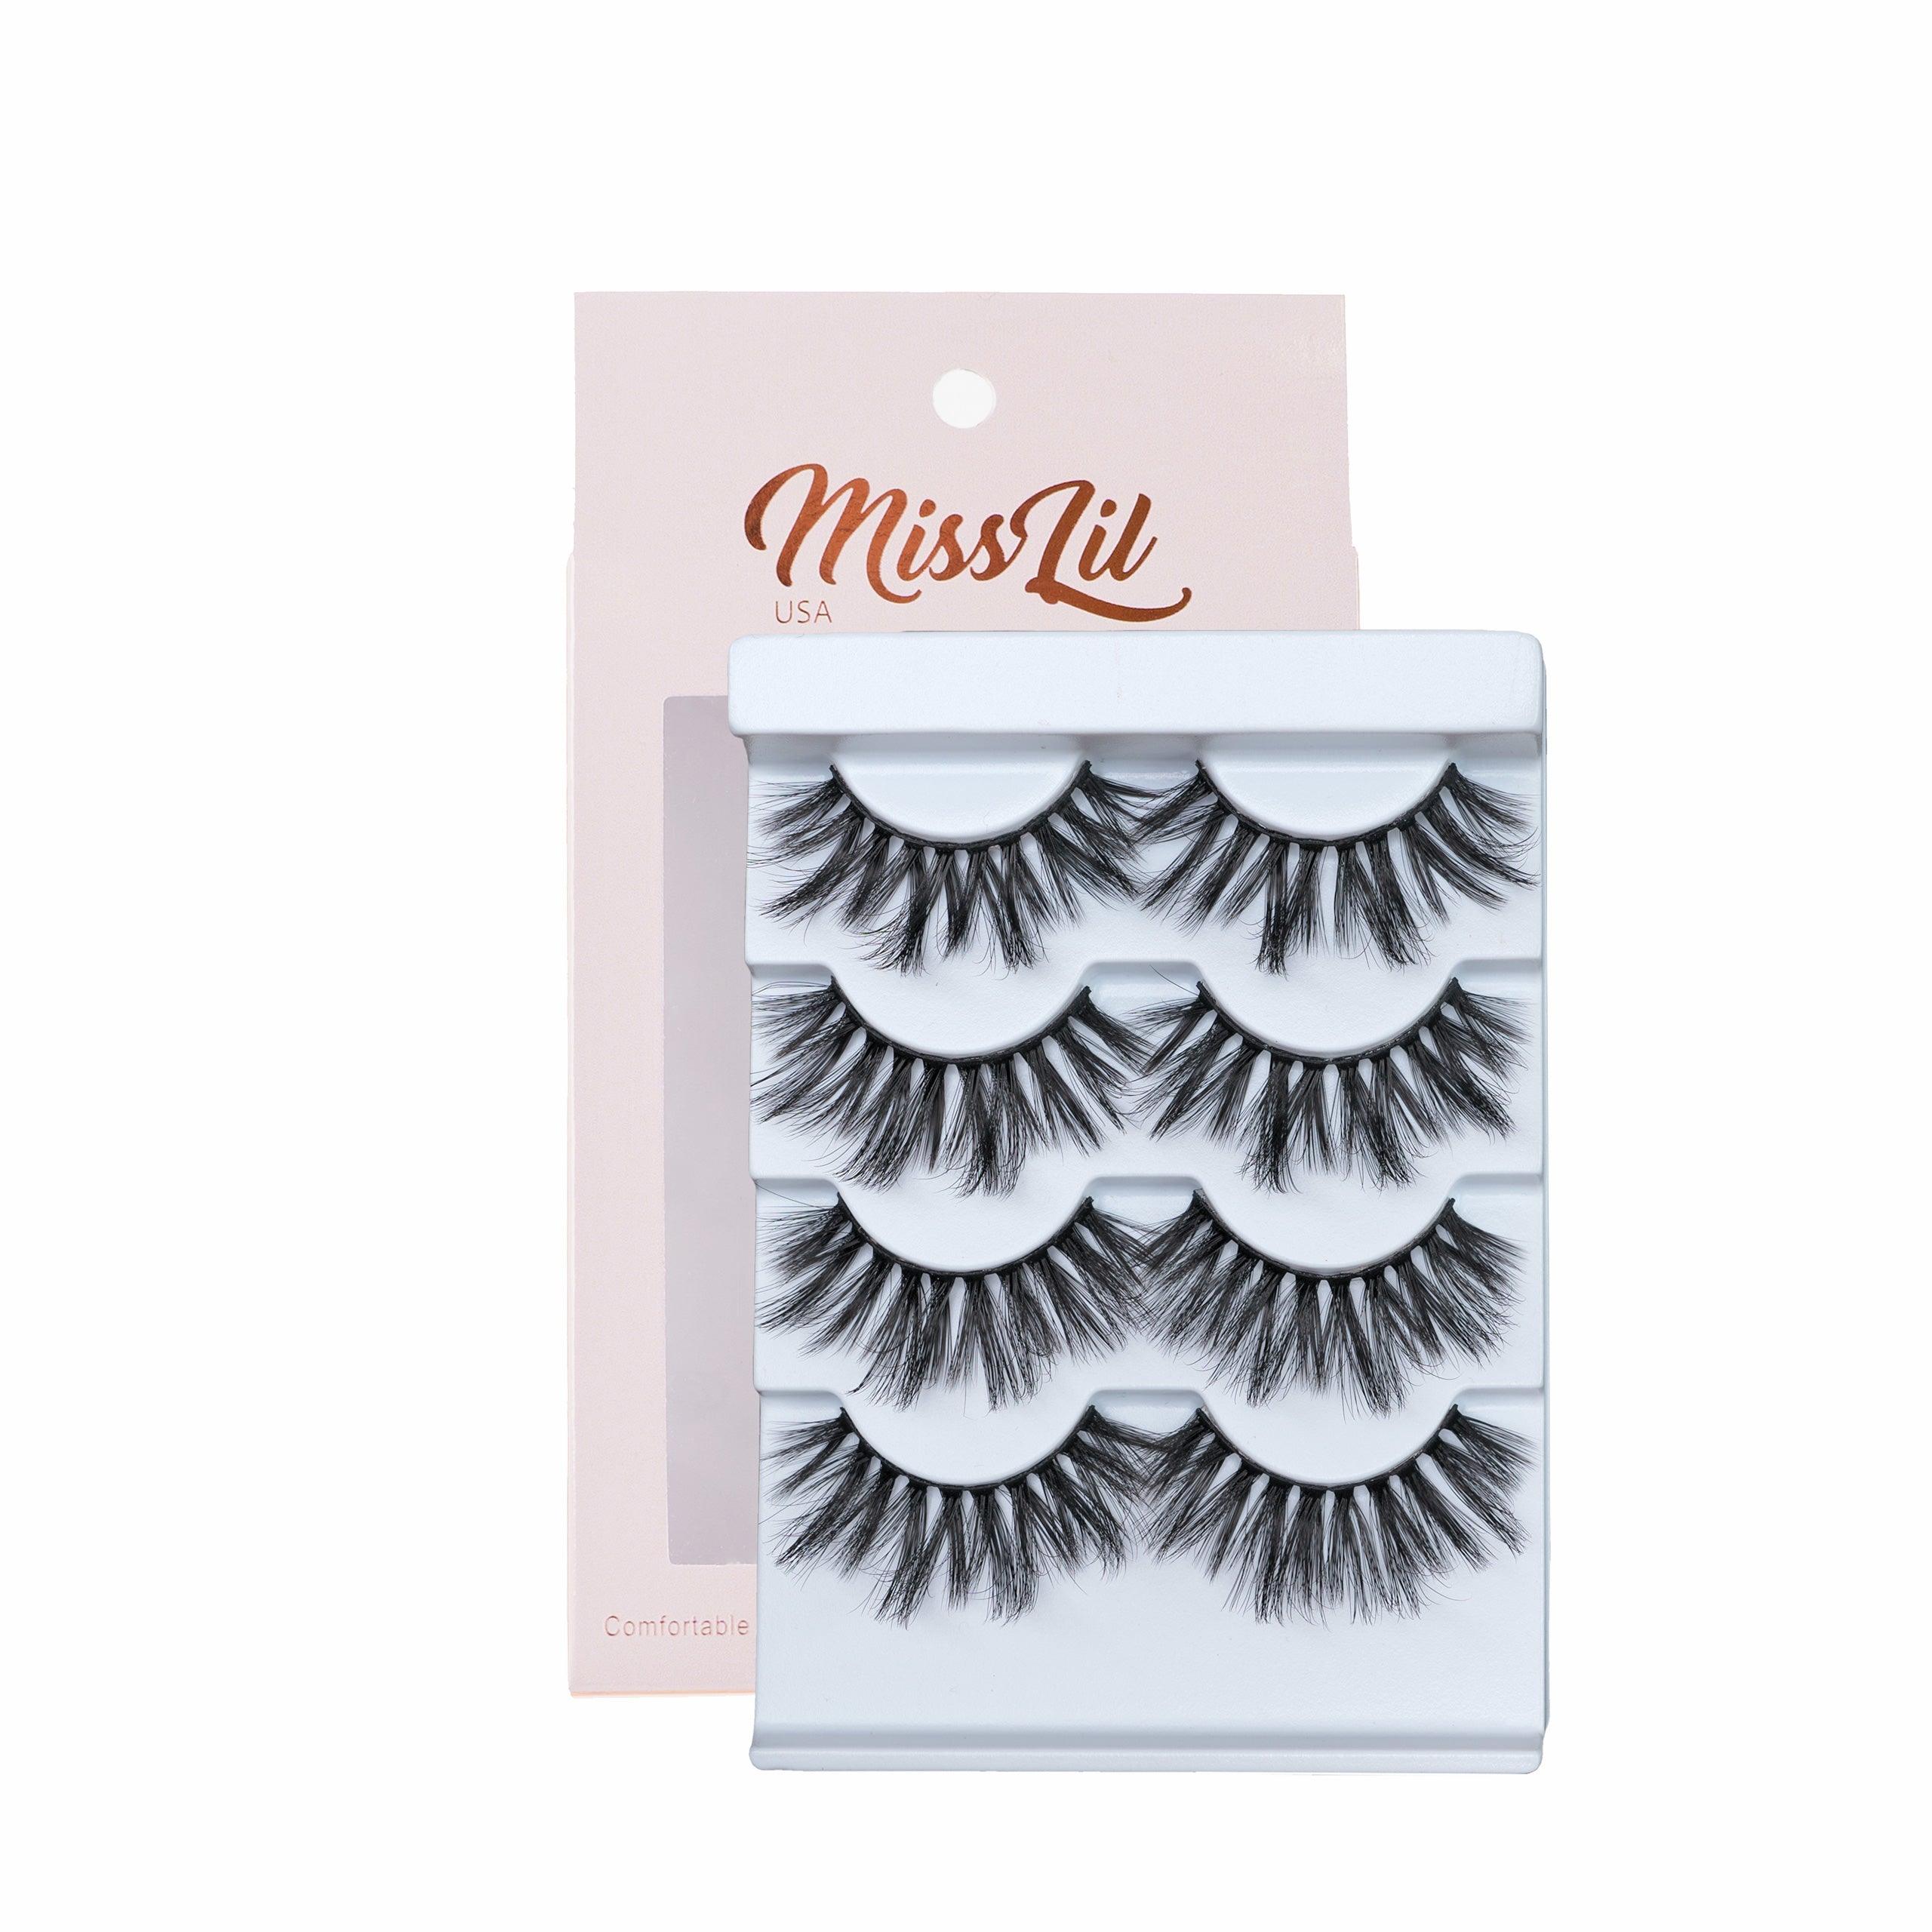 4 Pairs Lashes - Classic Collection #11 - Miss Lil USA